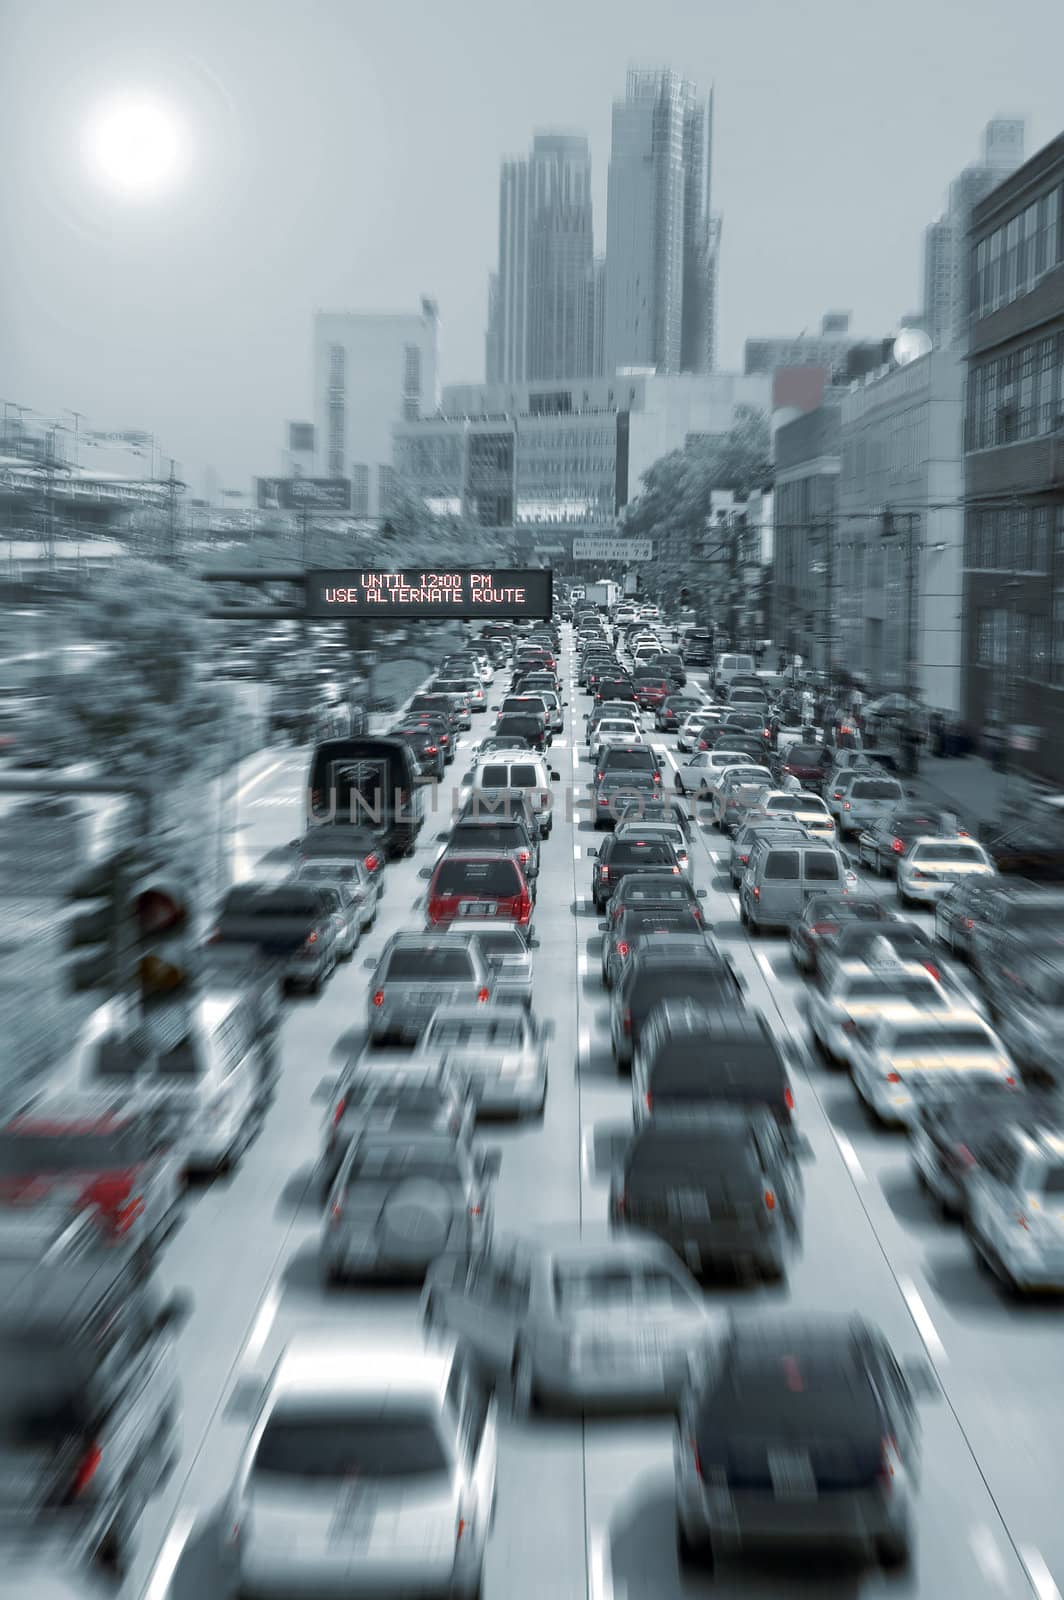 blurred traffic jam colored picture, photo taken in new york